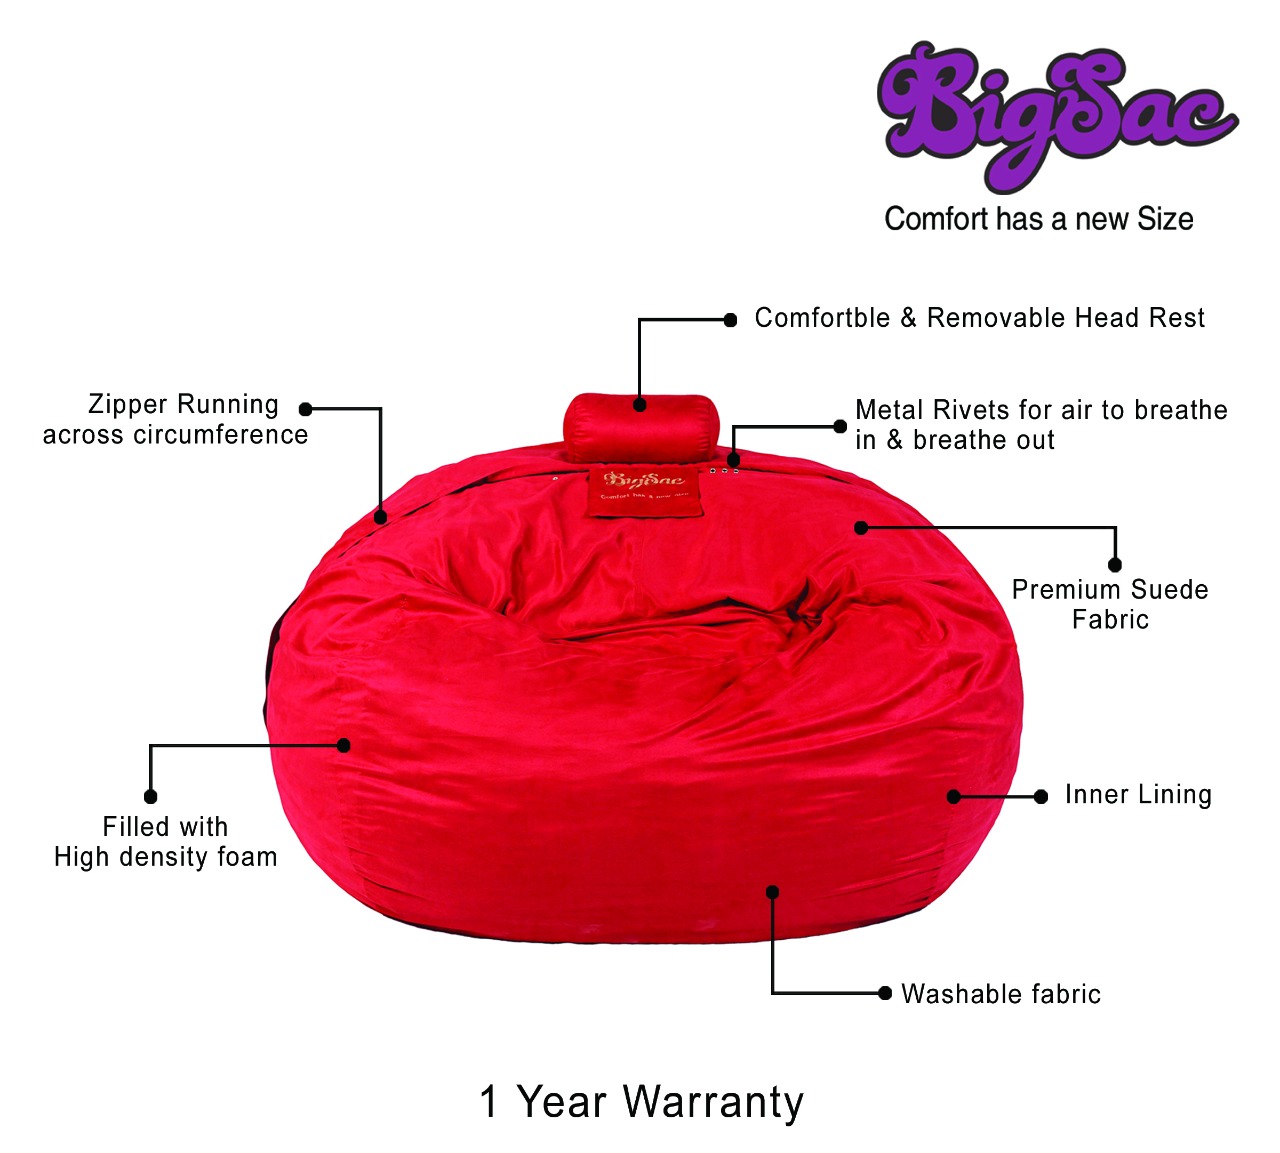 Big Sac 2.5 Feet My Sac Premium Suede Fabric Filled Red Color - 5 Years Warranty            